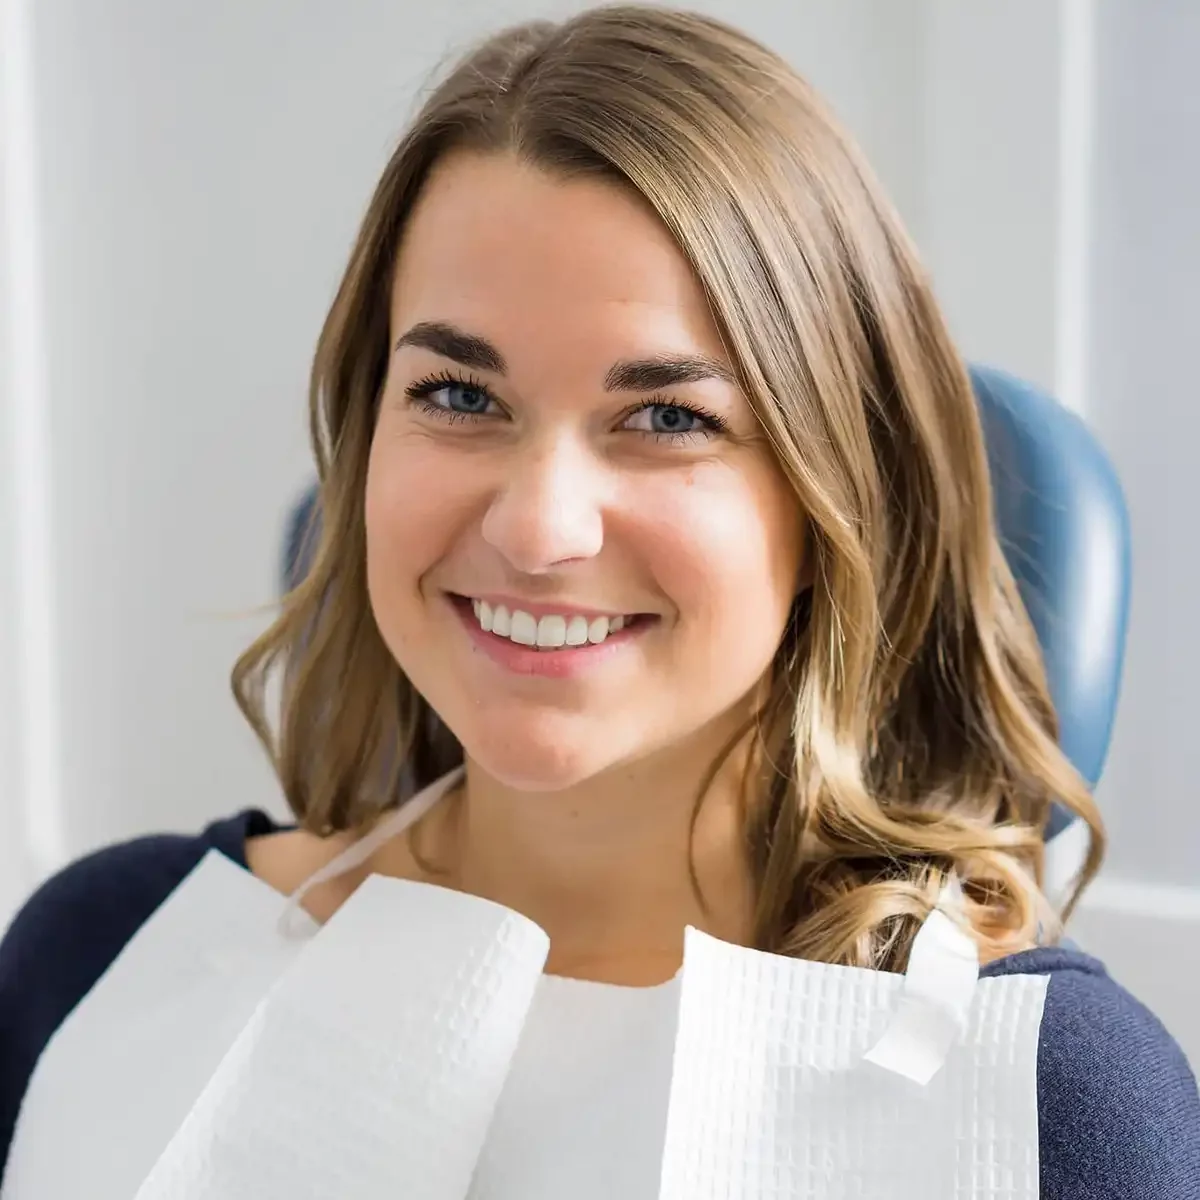 A woman with a bright smile sits in a dental chair, after receiving dental bridges